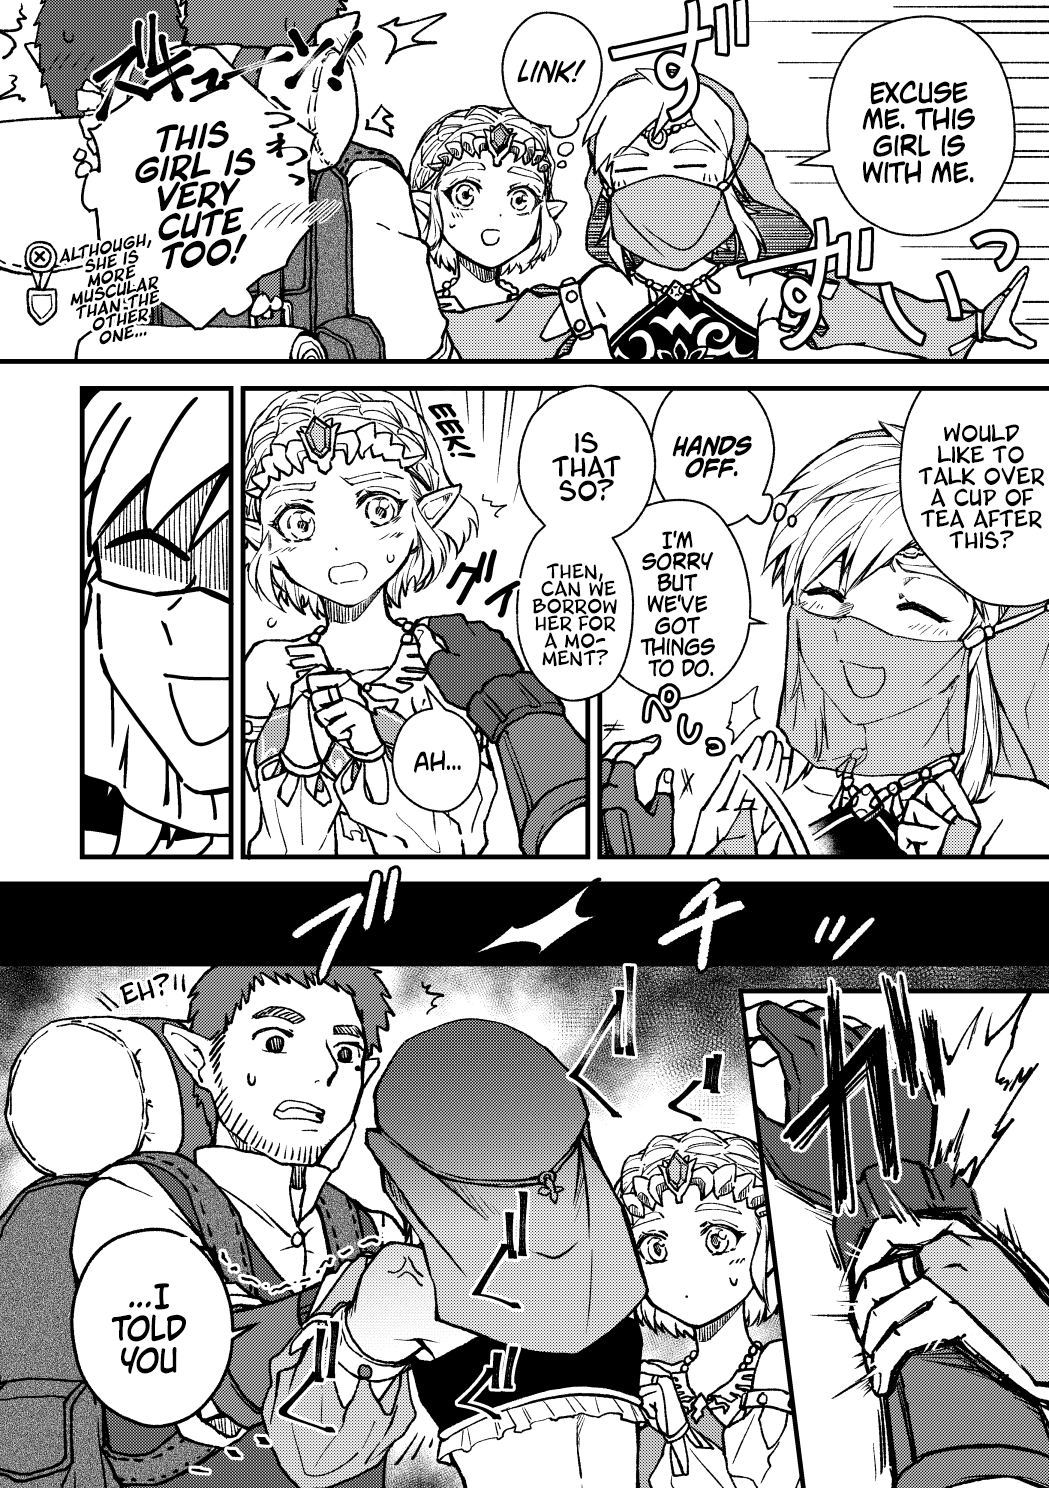 Breath Of The Wild Manga The Legend of Zelda Breath of the Wild - A Watchdog's Instincts - Chapter 1  - Page 1 | Danke.moe